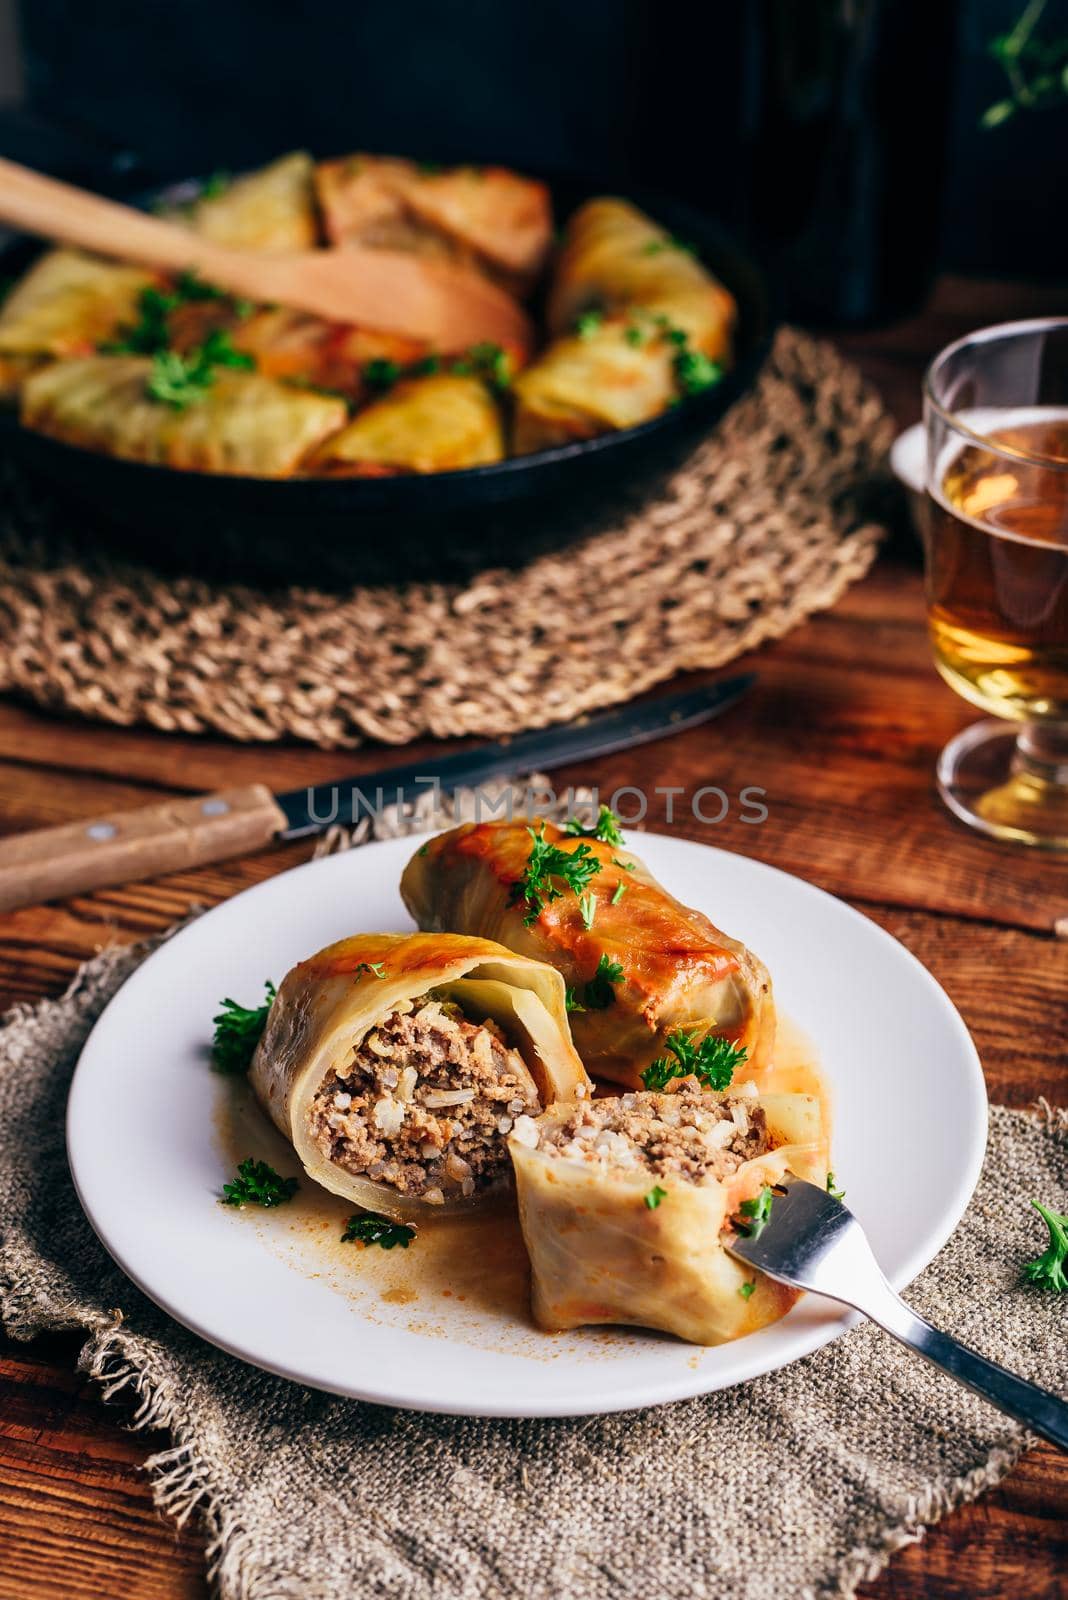 Two Cabbage Rolls Stuffed with Minced Meat and Rice on White Plate Served with Chopped Parsley